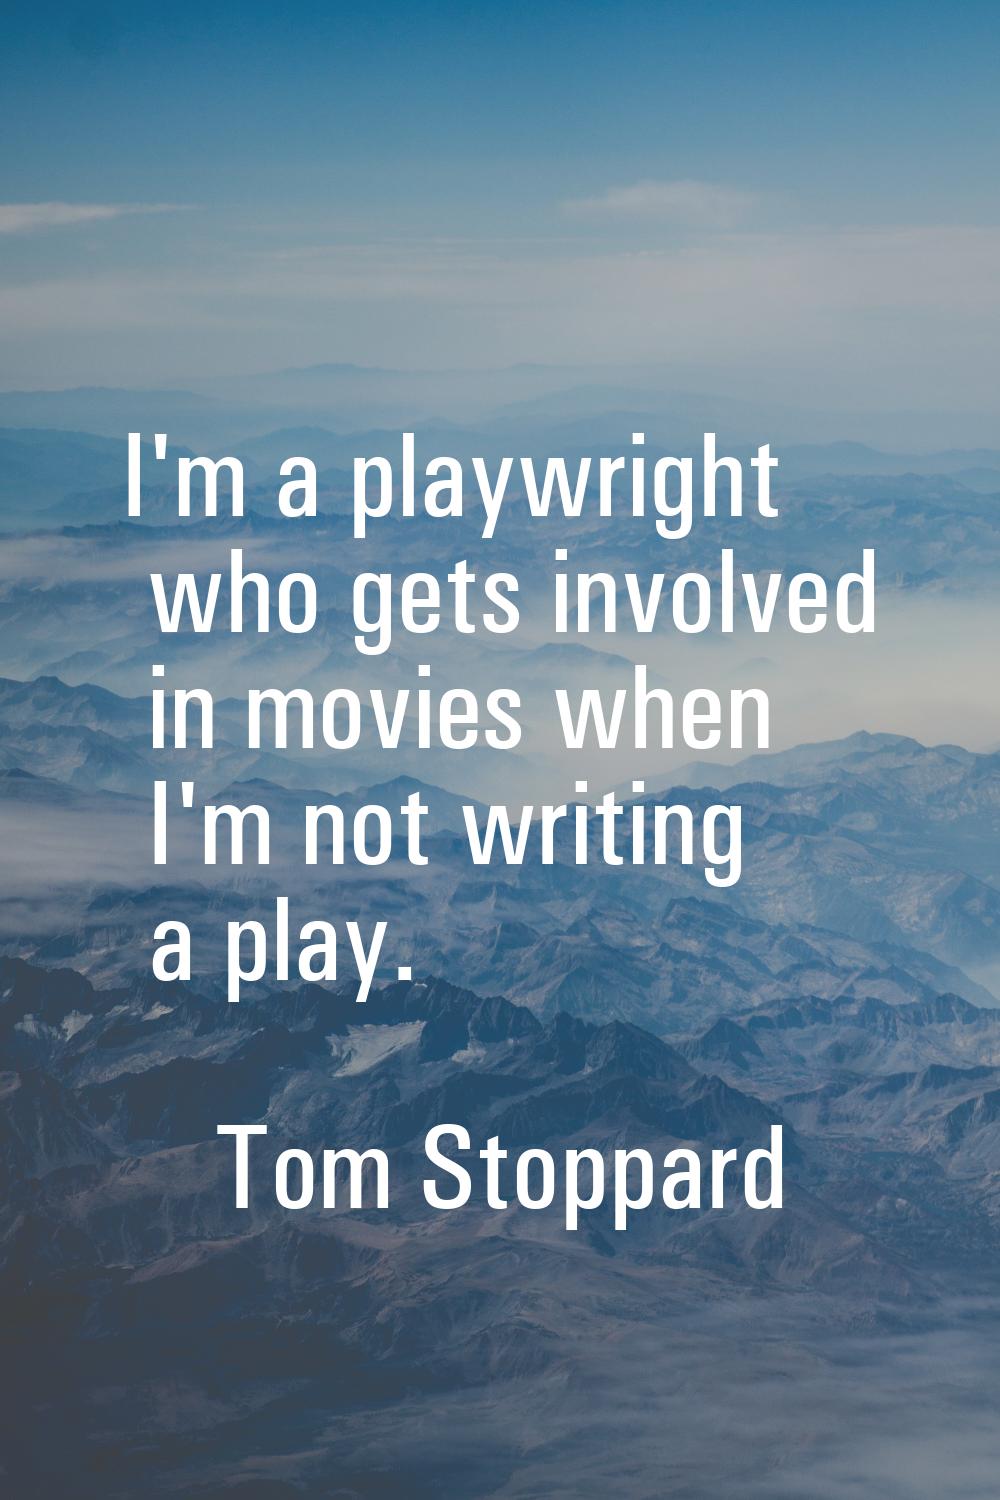 I'm a playwright who gets involved in movies when I'm not writing a play.